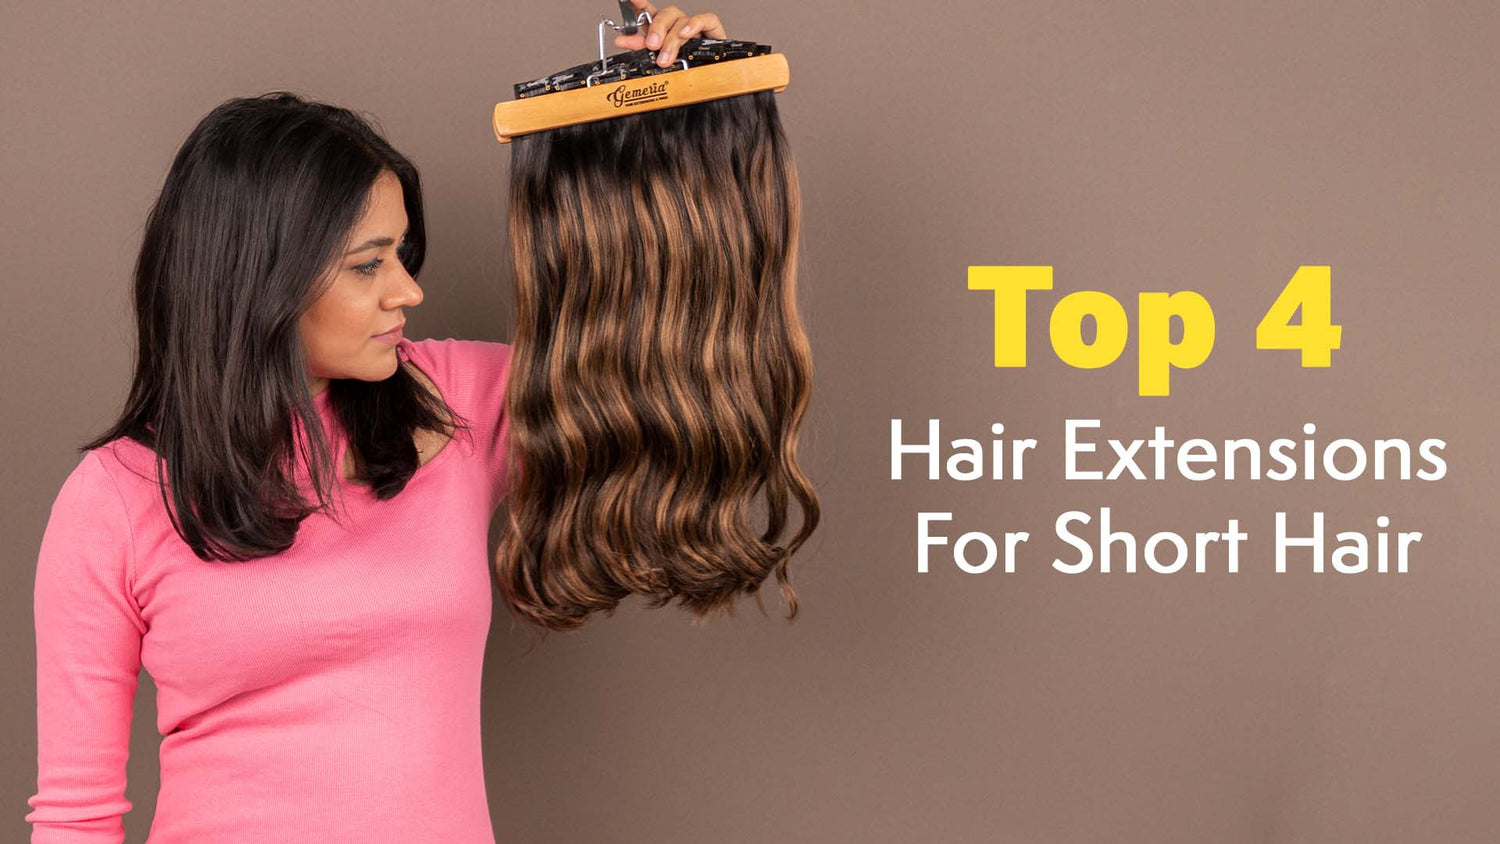 Top 4 Hair Extensions For Short Hair